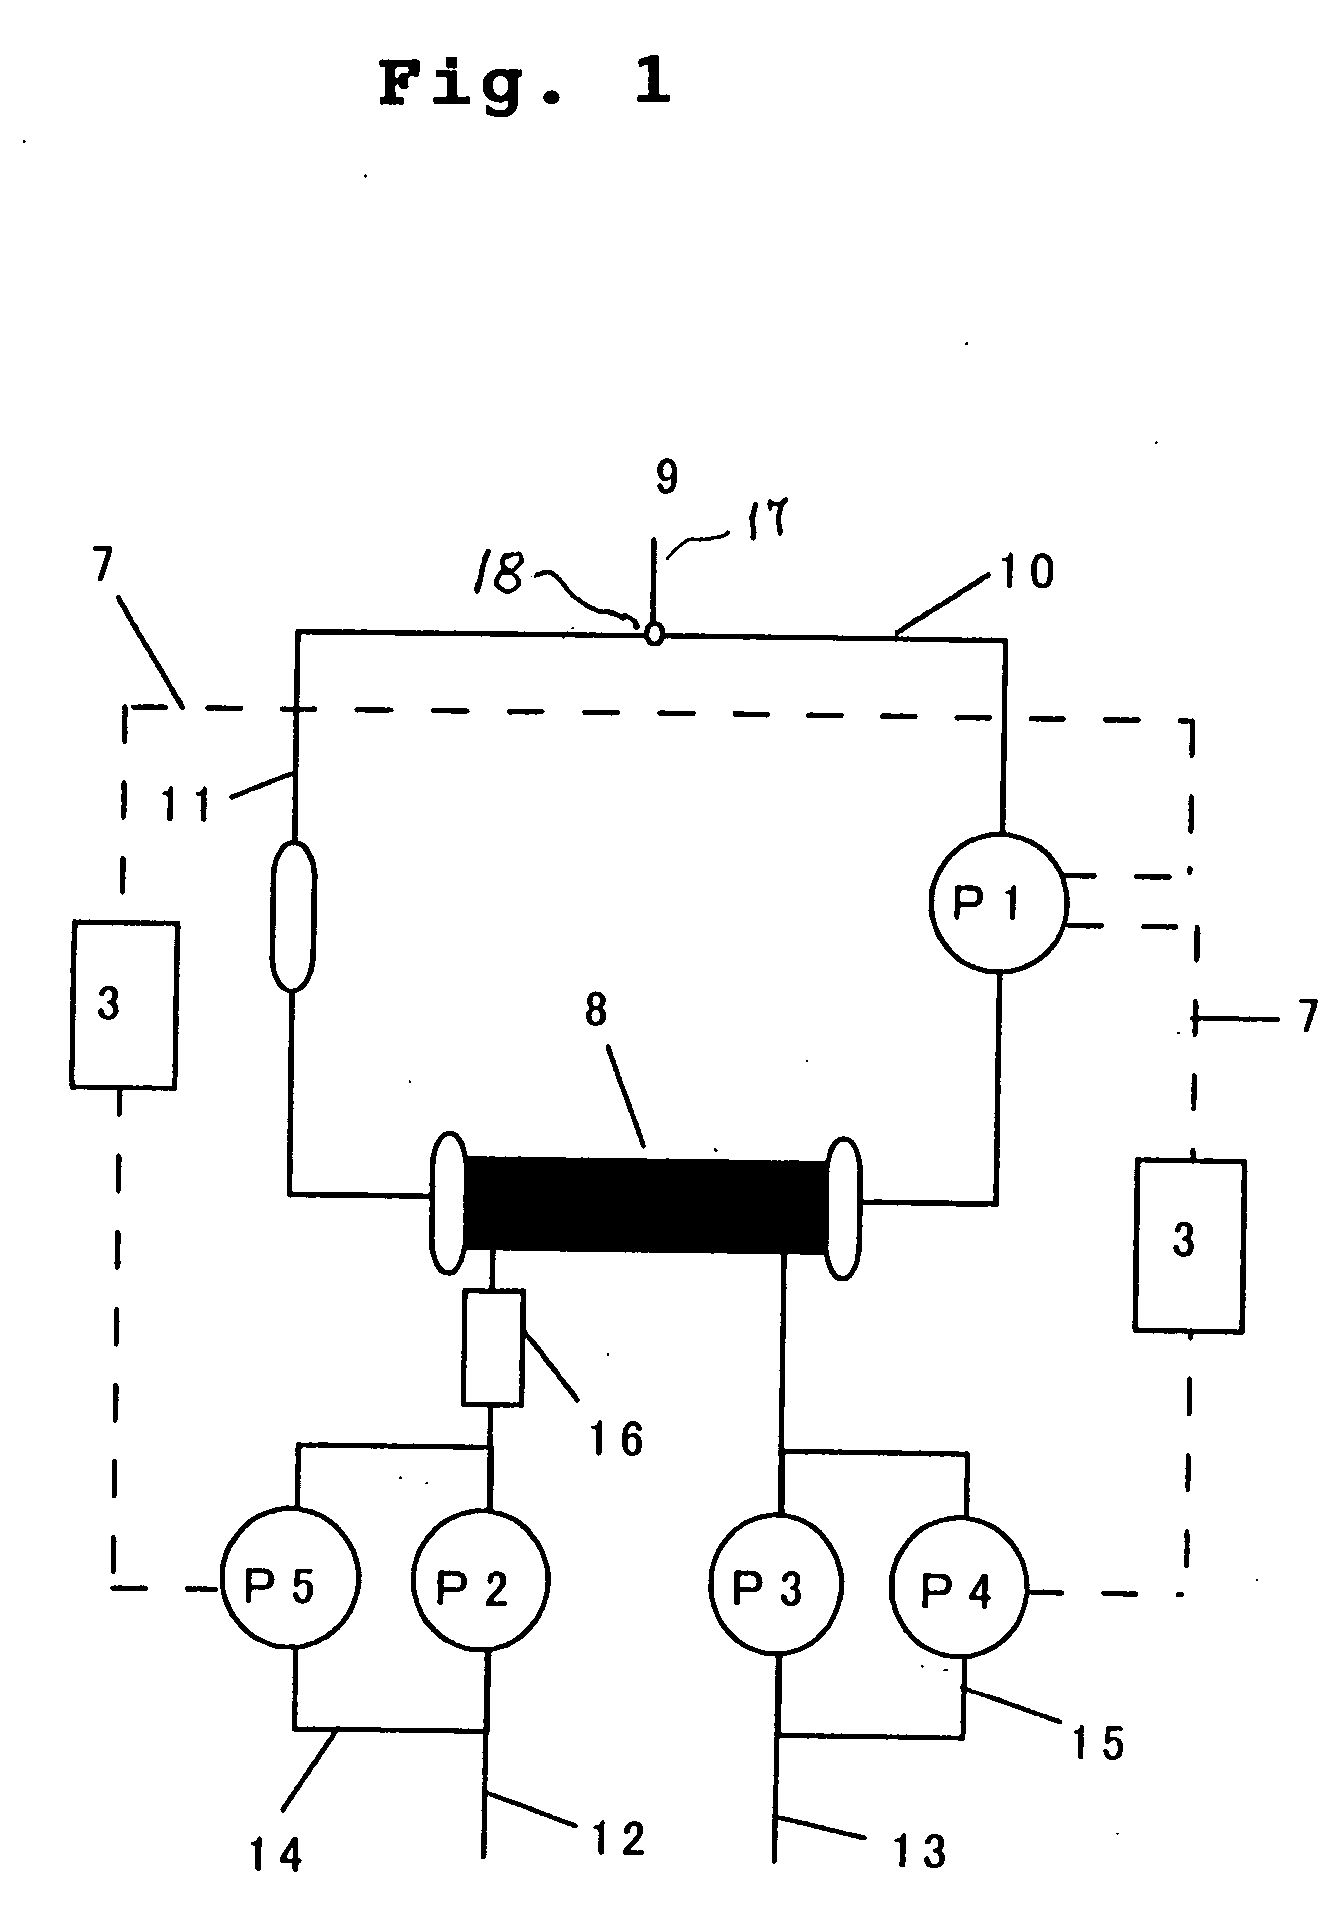 Apparatus for blood dialysis and filtration